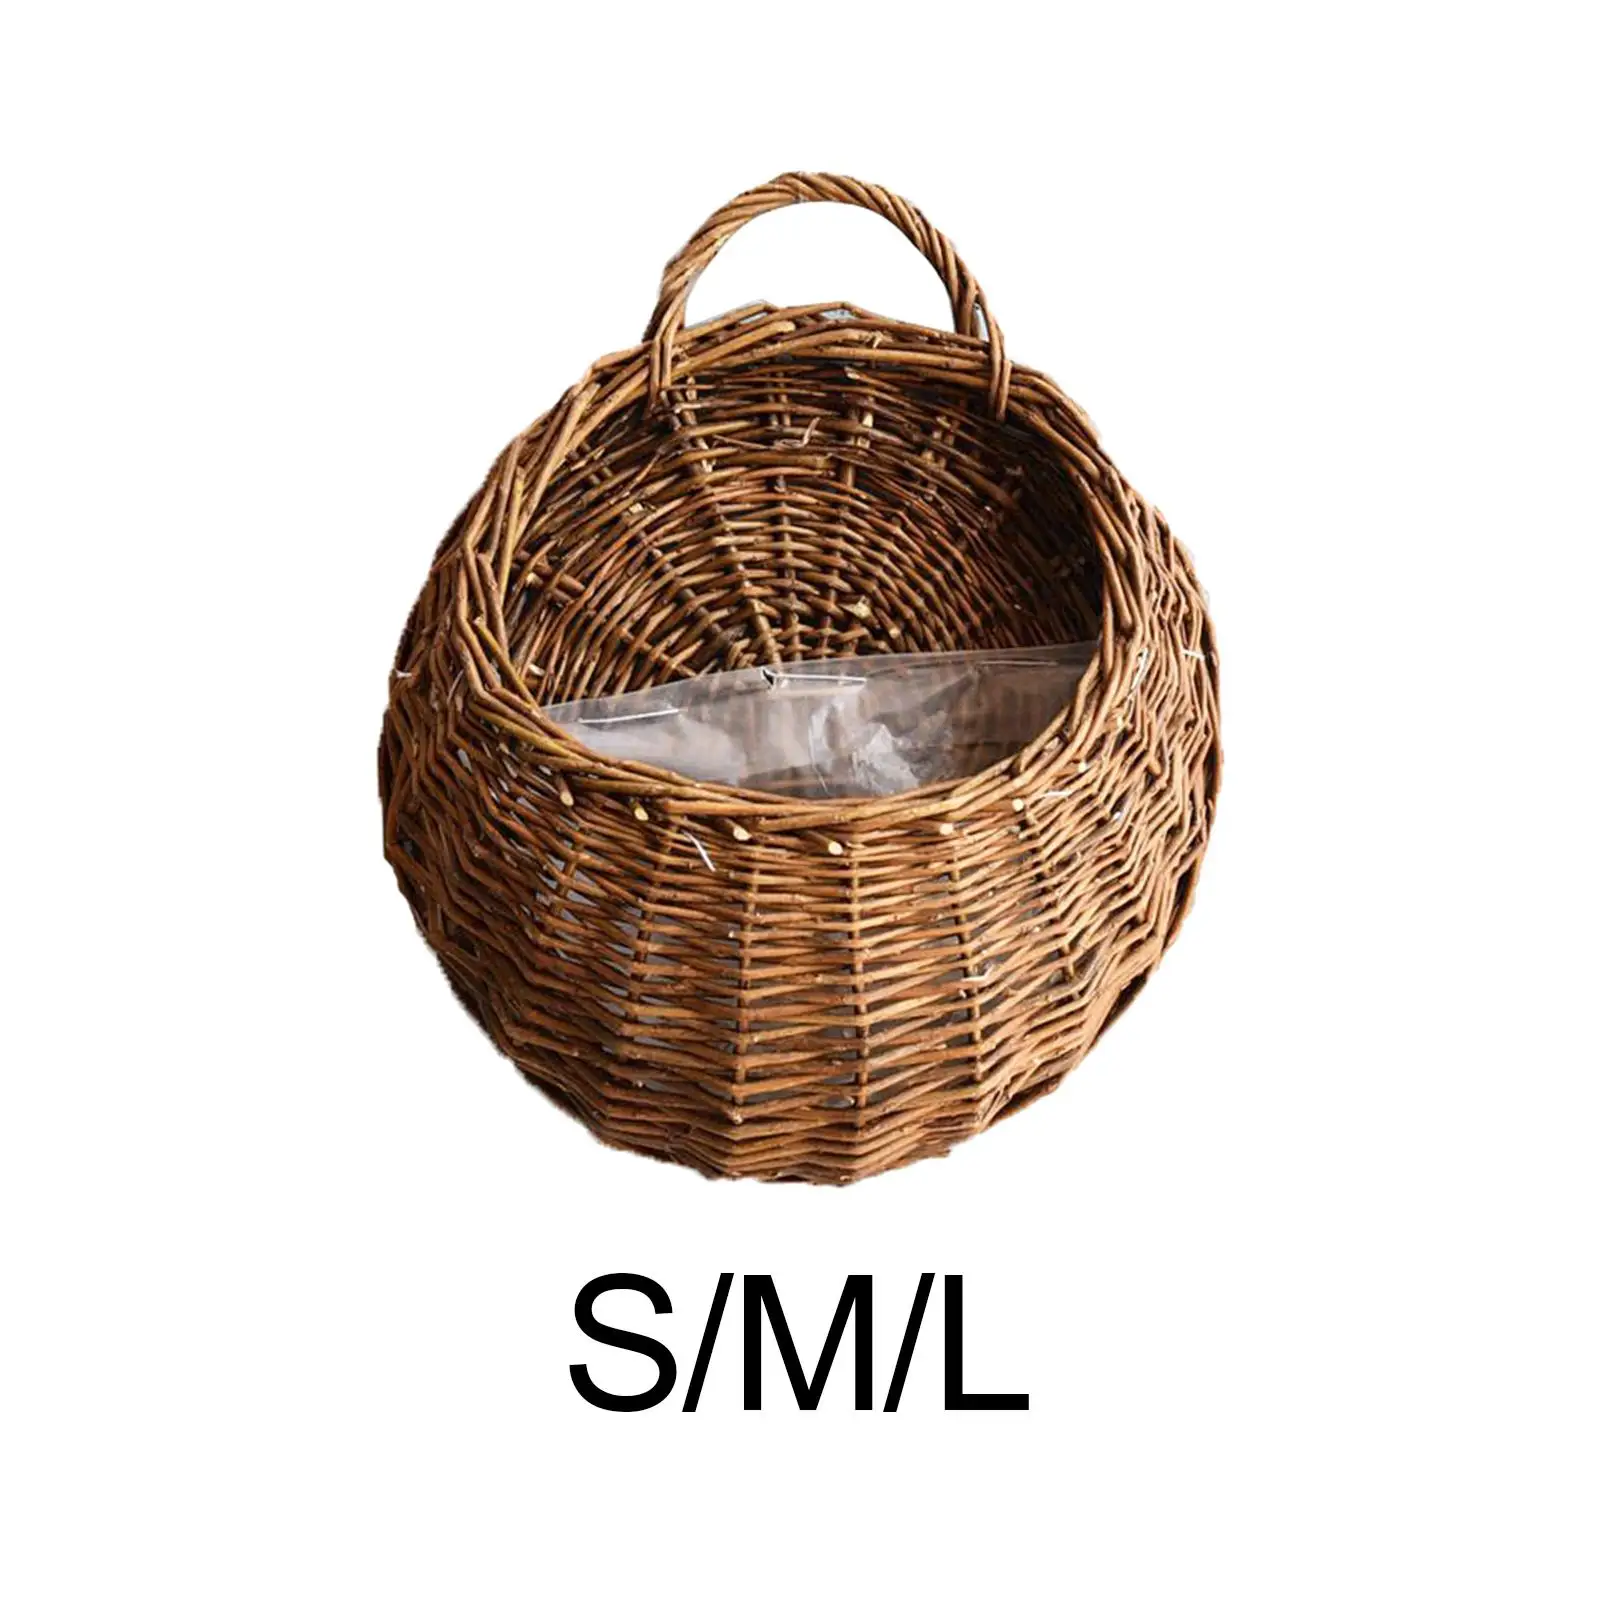 Woven Flower Basket Rustic Laundry Basket Round Crafts for Patio Wedding